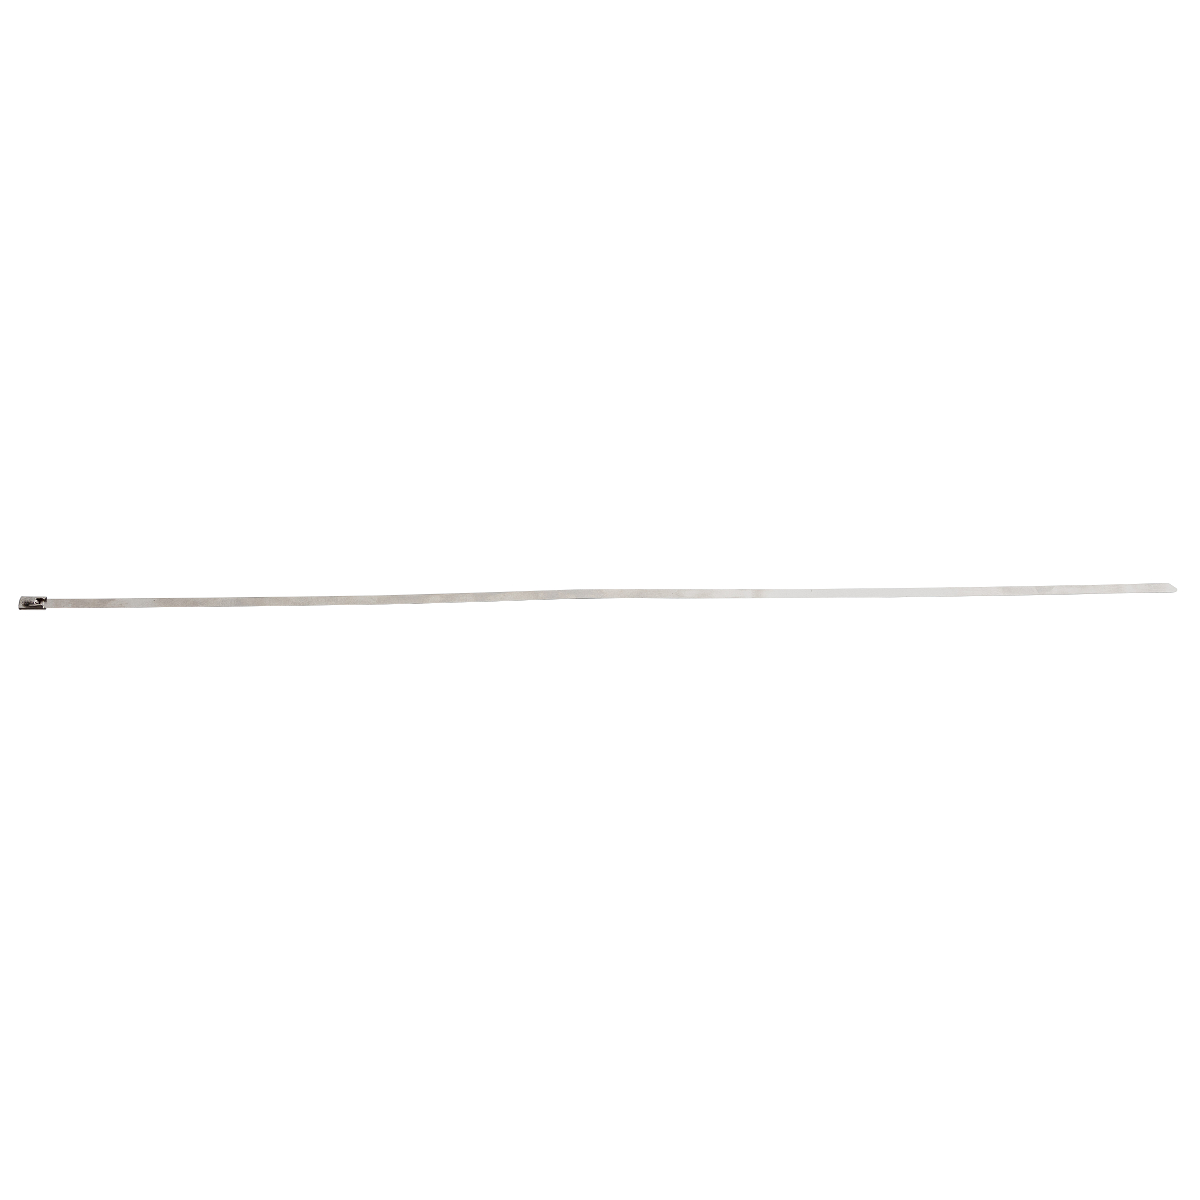 B7316 STEEL CABLE TIE, 7.90MM X 520MM